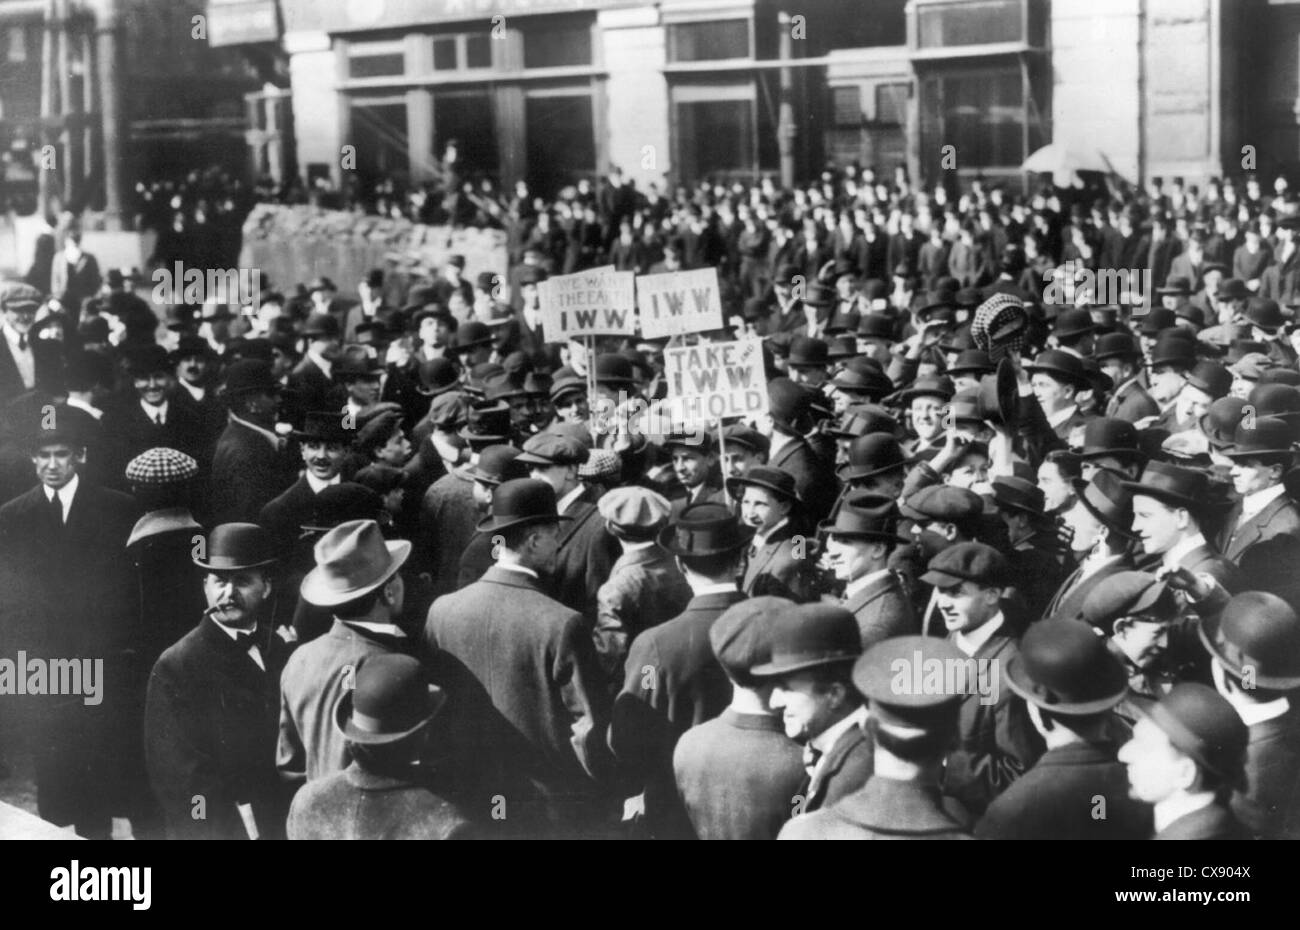 I.W.W. Meeting -- Union Square - crowd at IWW (Industrial Workers of the World) rally in Union Square, New York City on April 11, 1914 Stock Photo